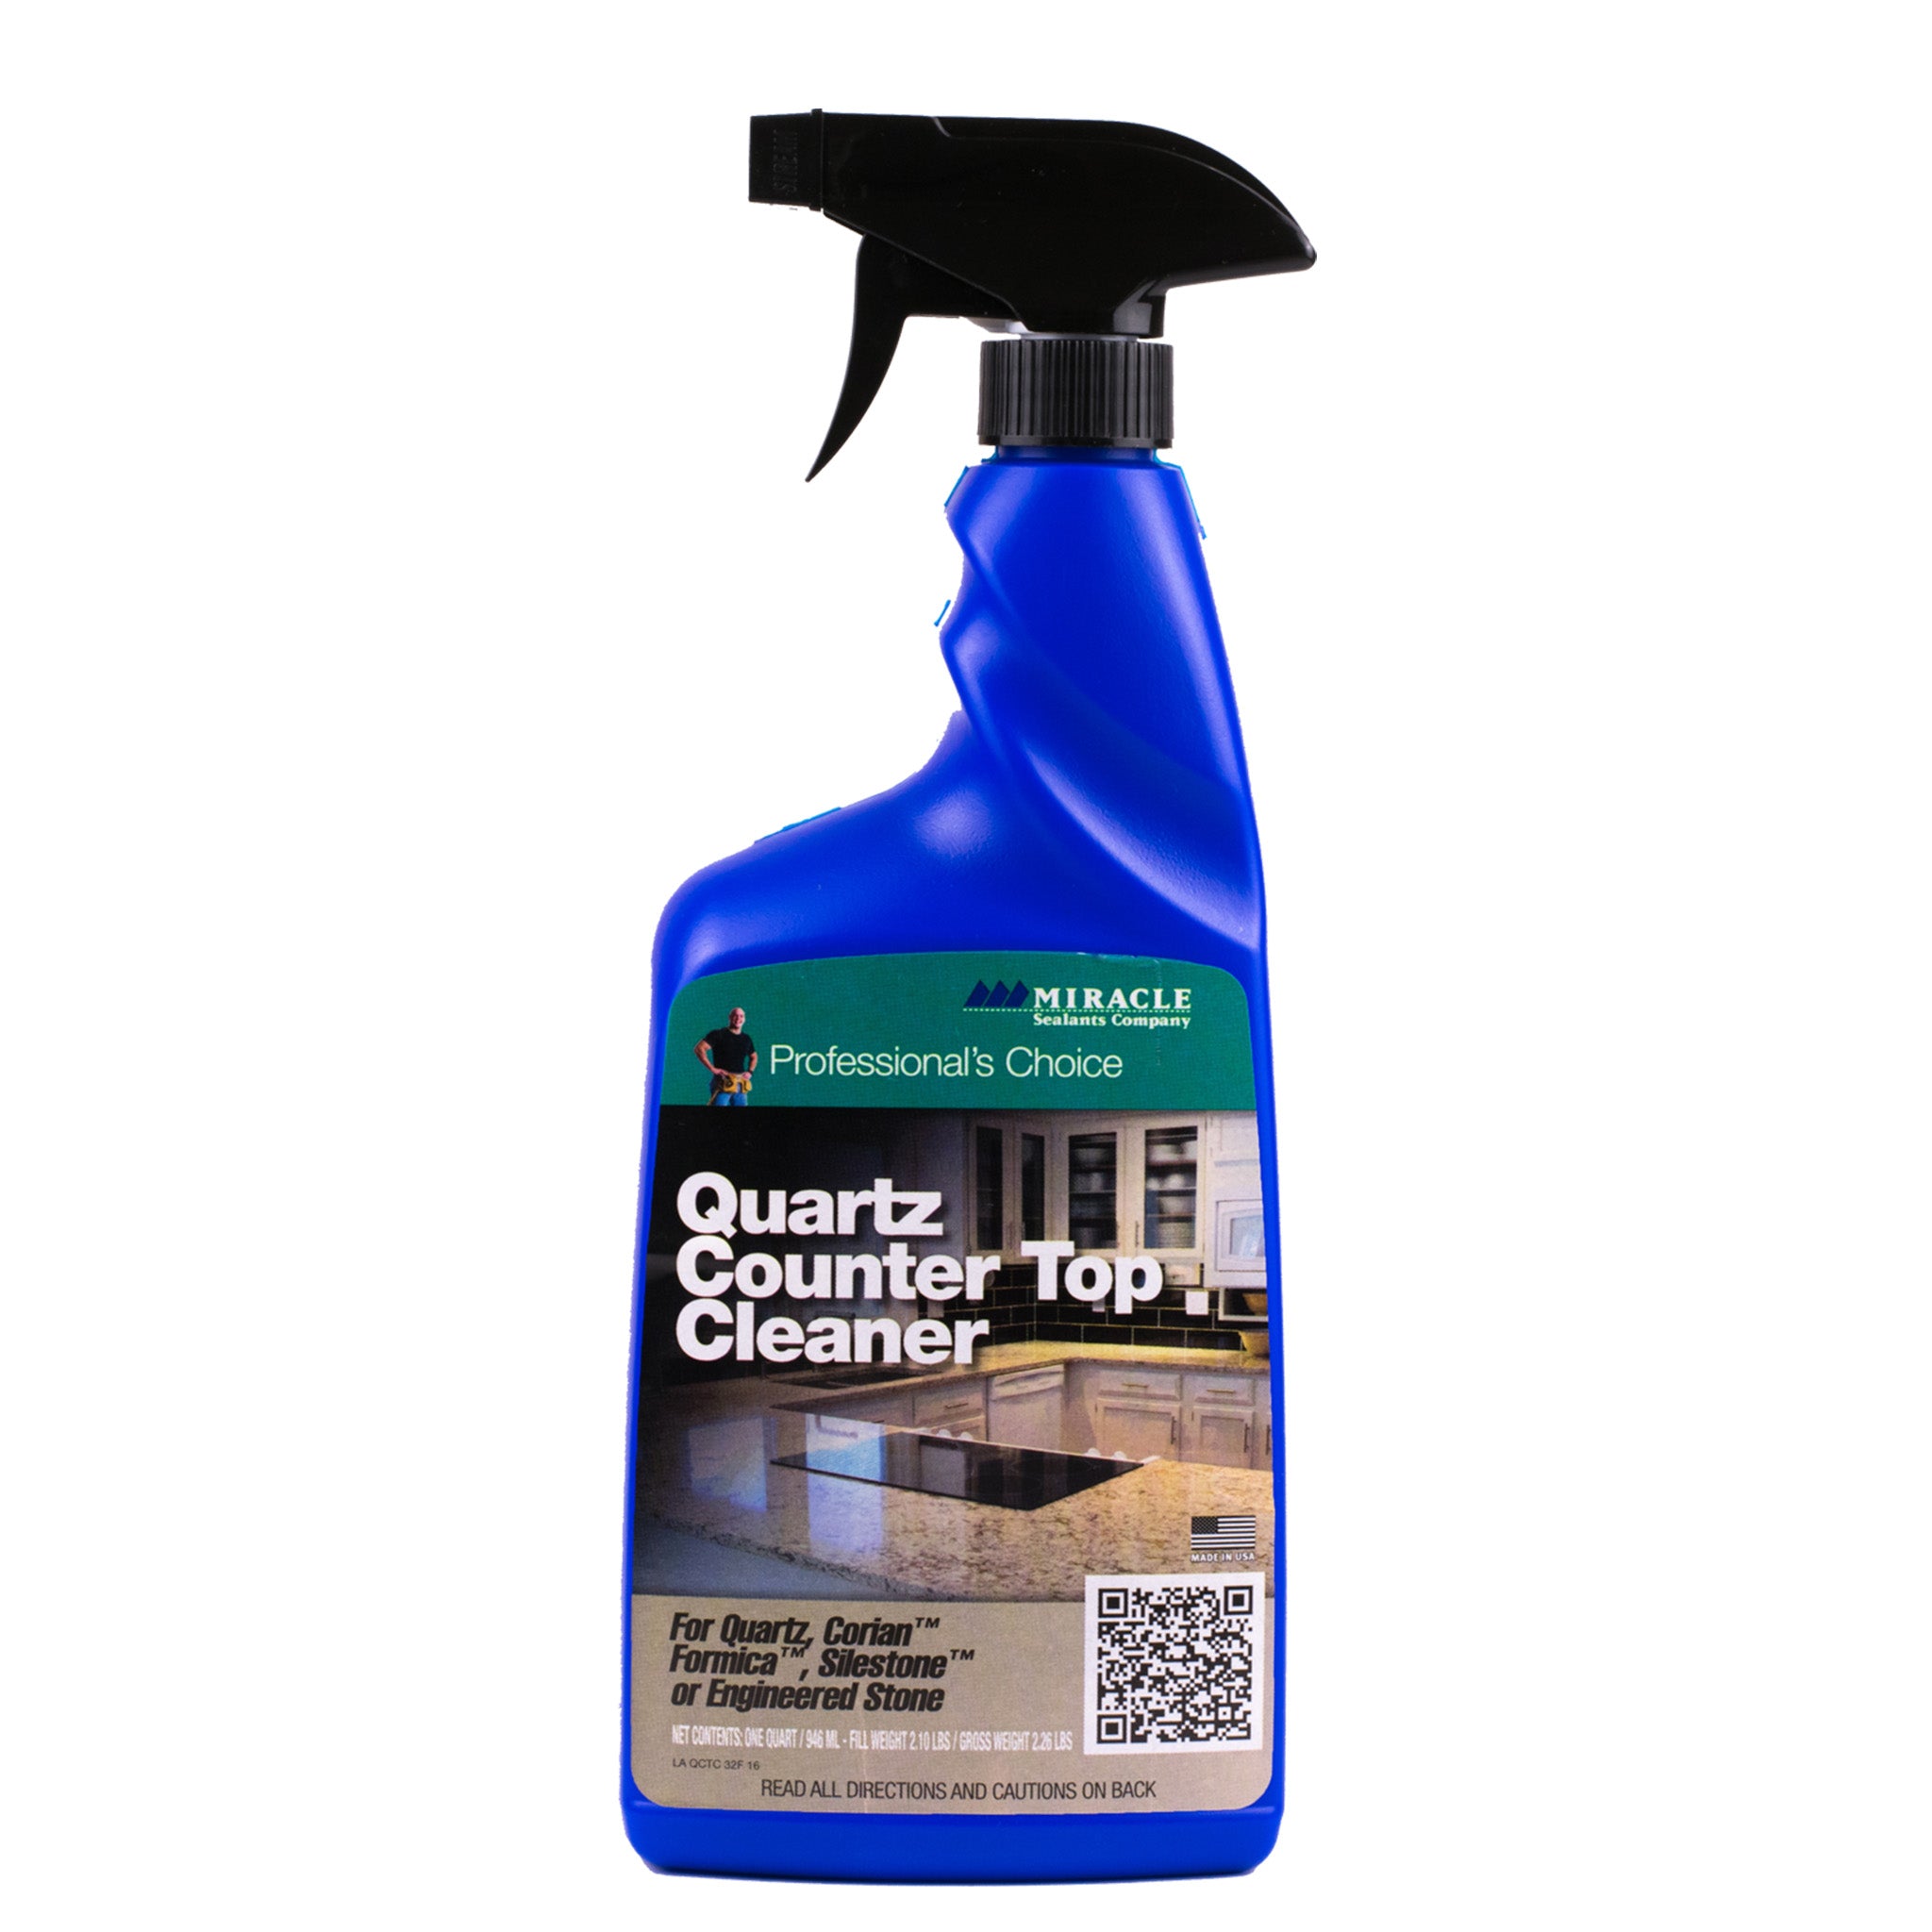 Miracle Quartz Counter Top Cleaner